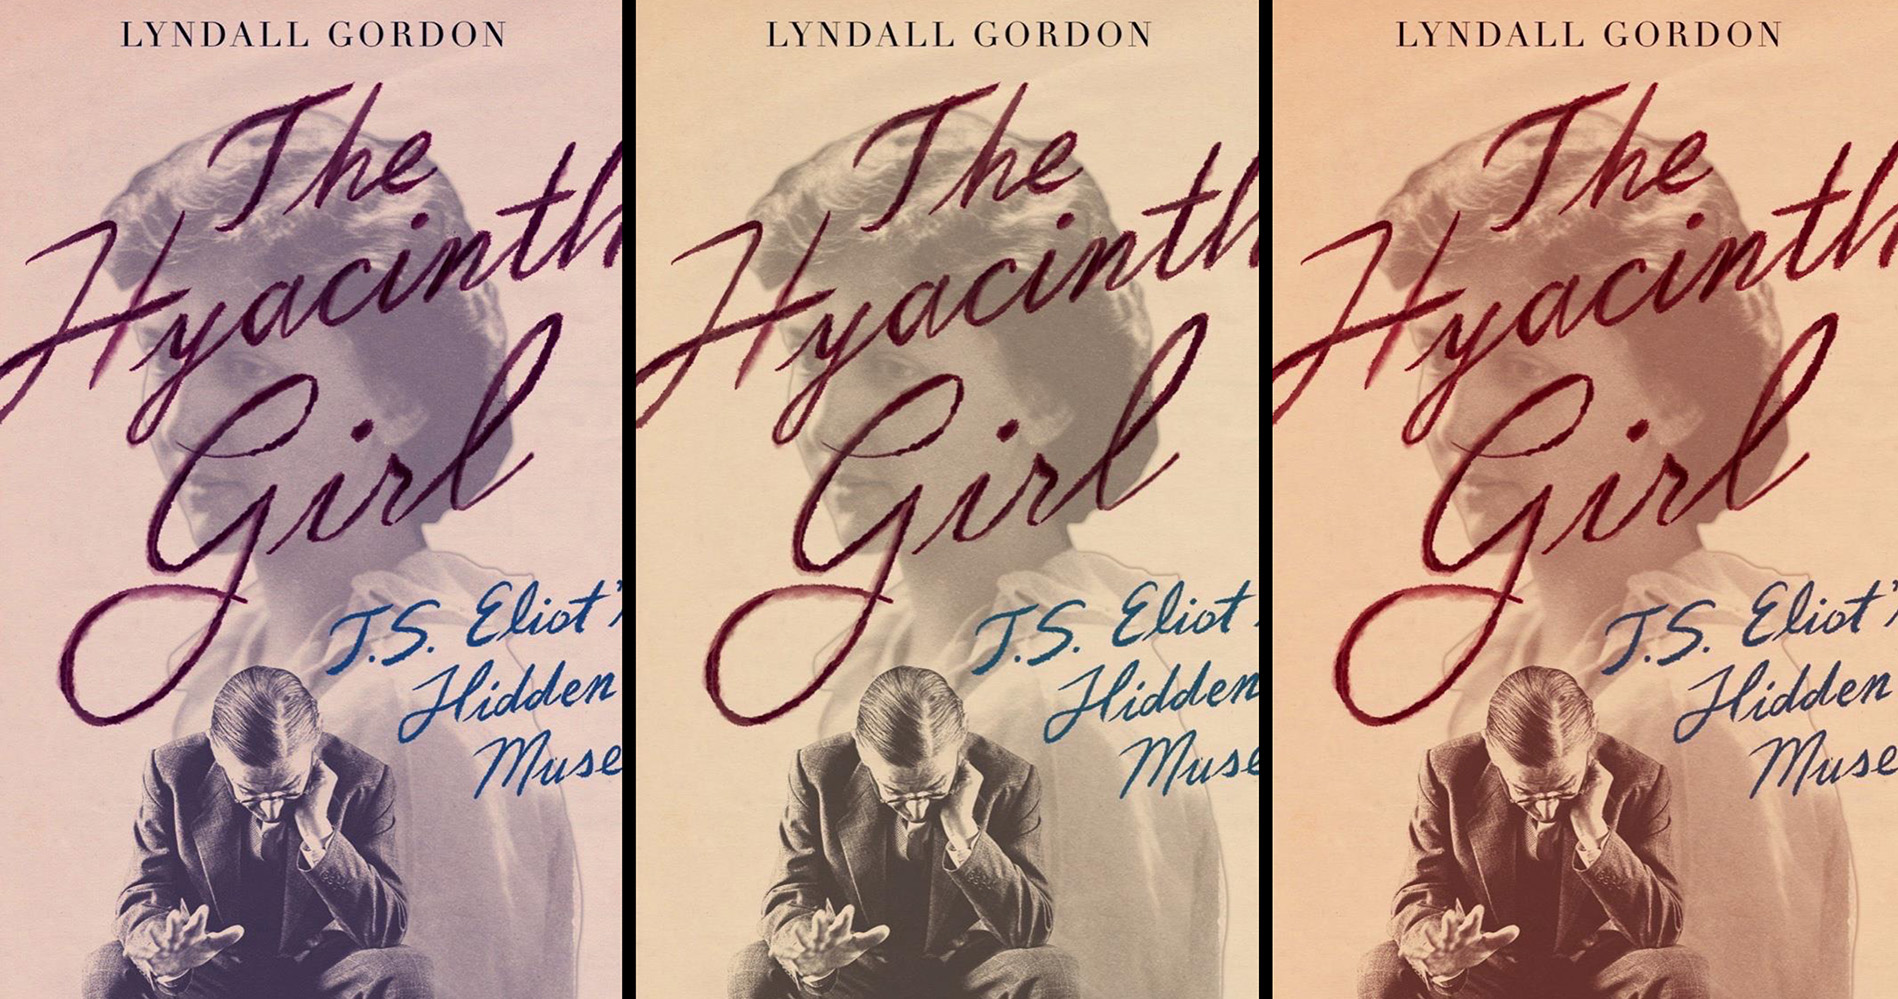 ‘The Hyacinth Girl: T.S. Eliot’s Hidden Muse’ by Lyndall Gordon book cover. (Image: Goodreads / Wikipedia)